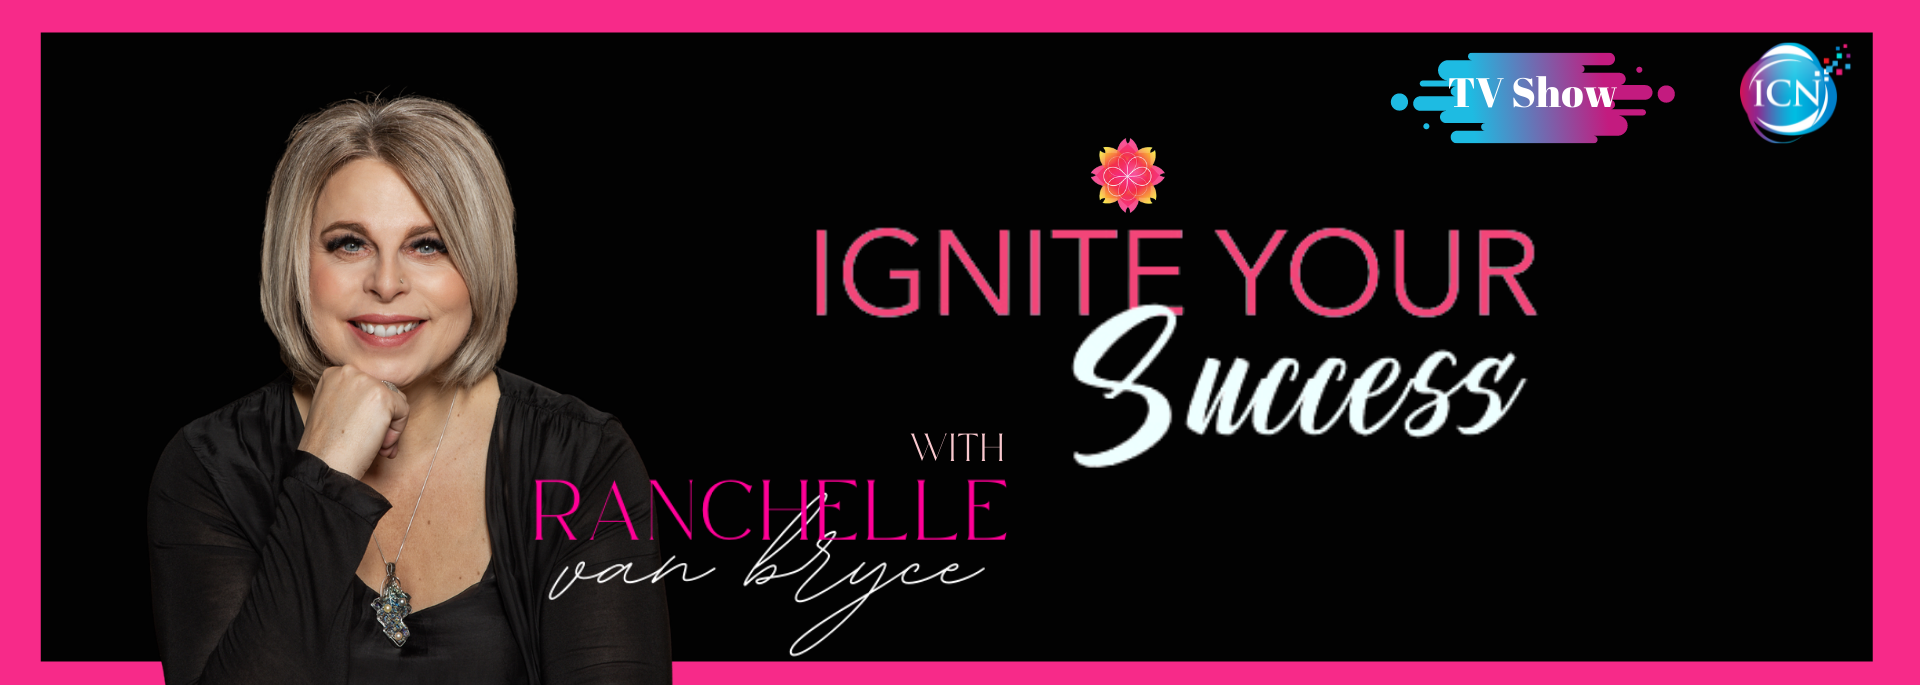 Ignite Your Success With Ranchelle Van Bryce